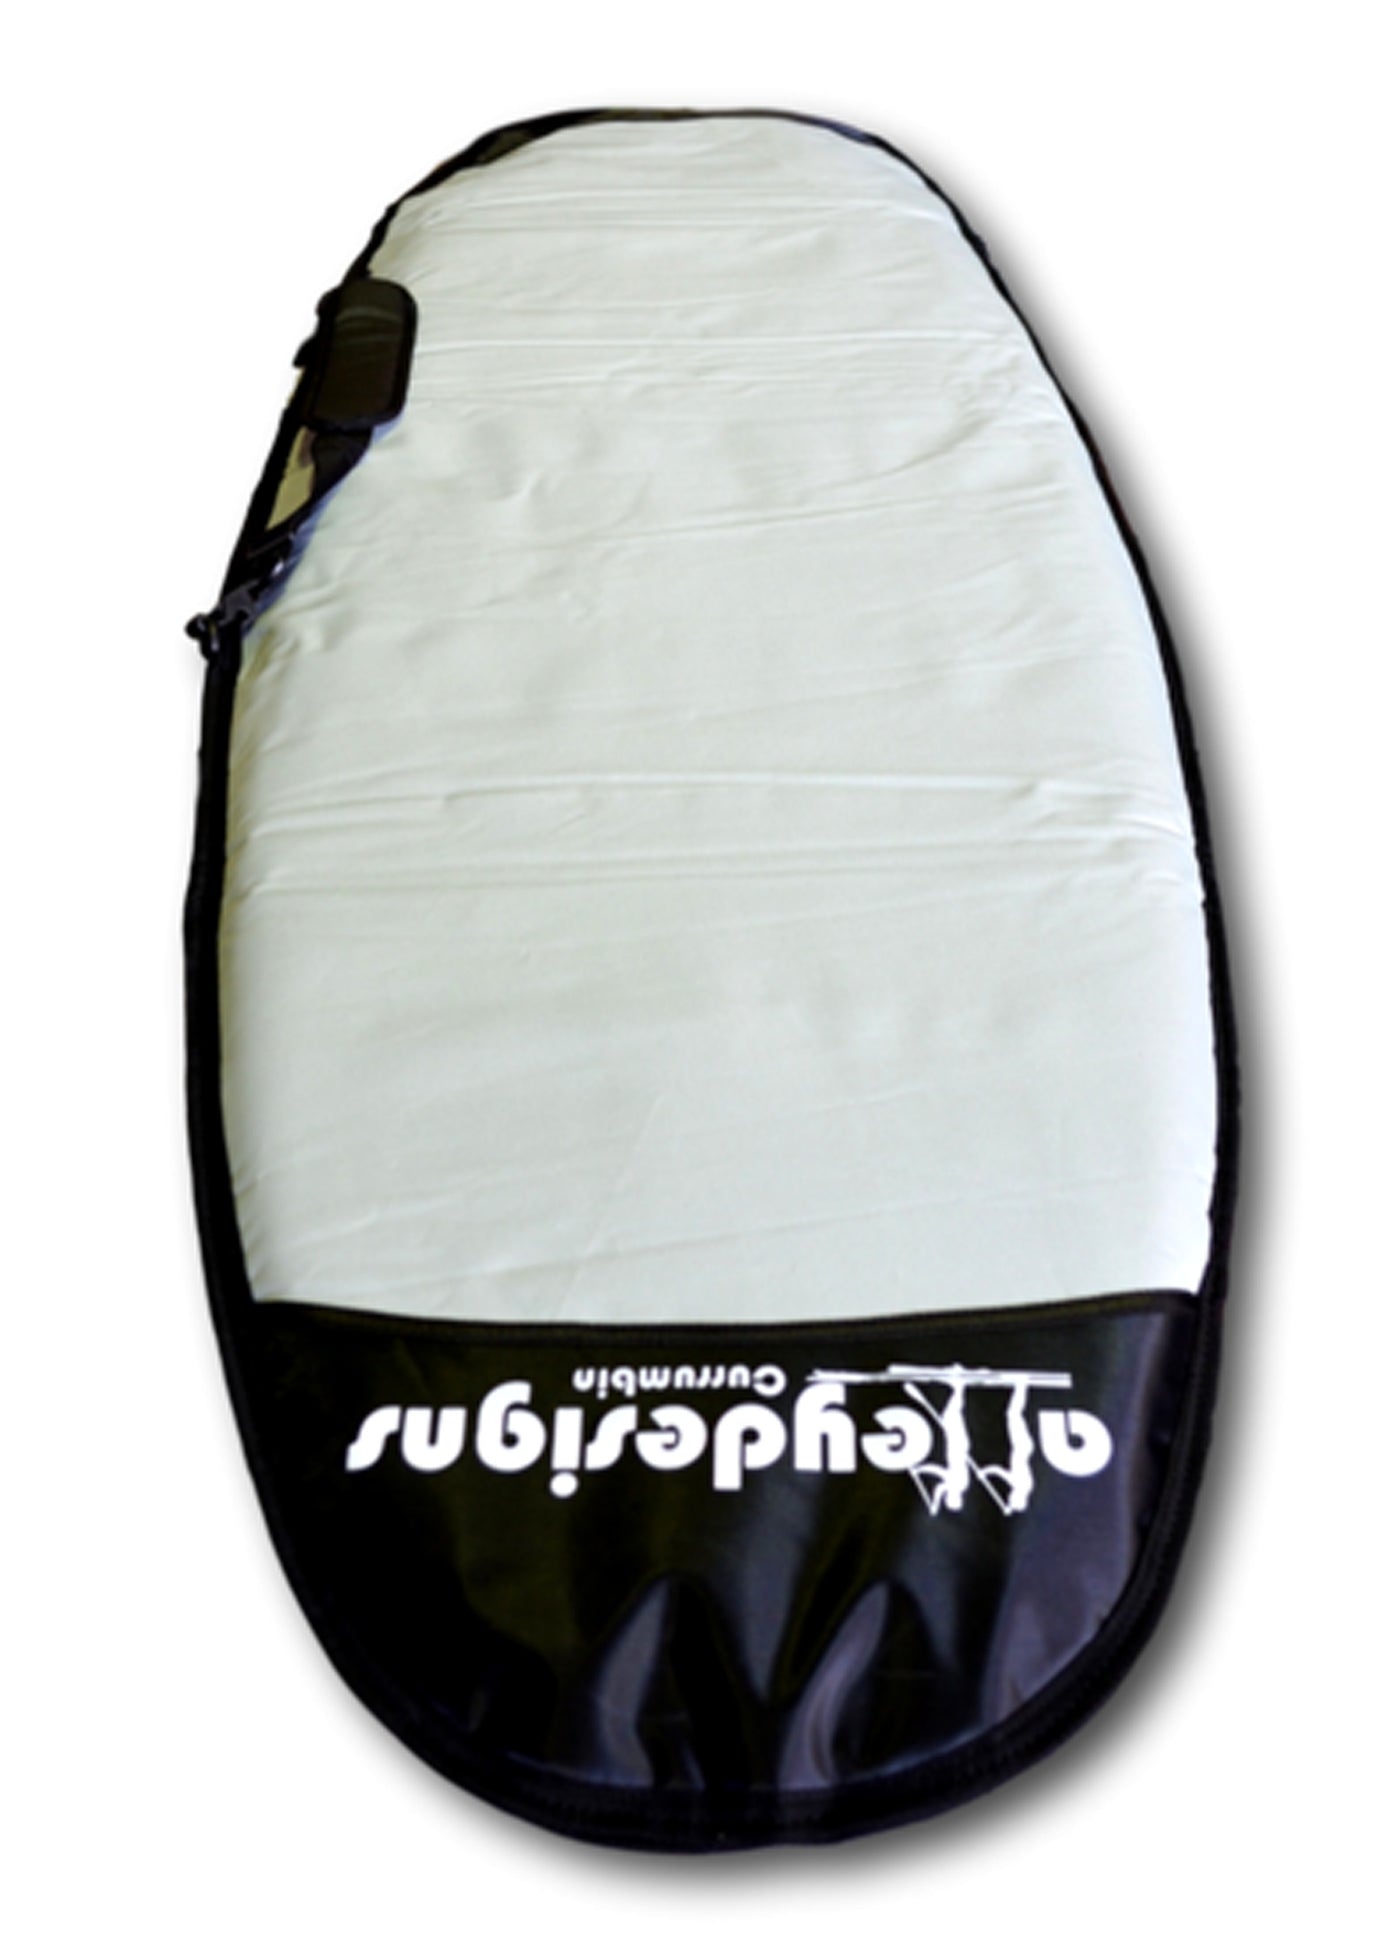 Surfboard Board Bags By Alleydesigns FREE SHIPPING - Alleydesigns  Pty Ltd                                             ABN: 44165571264